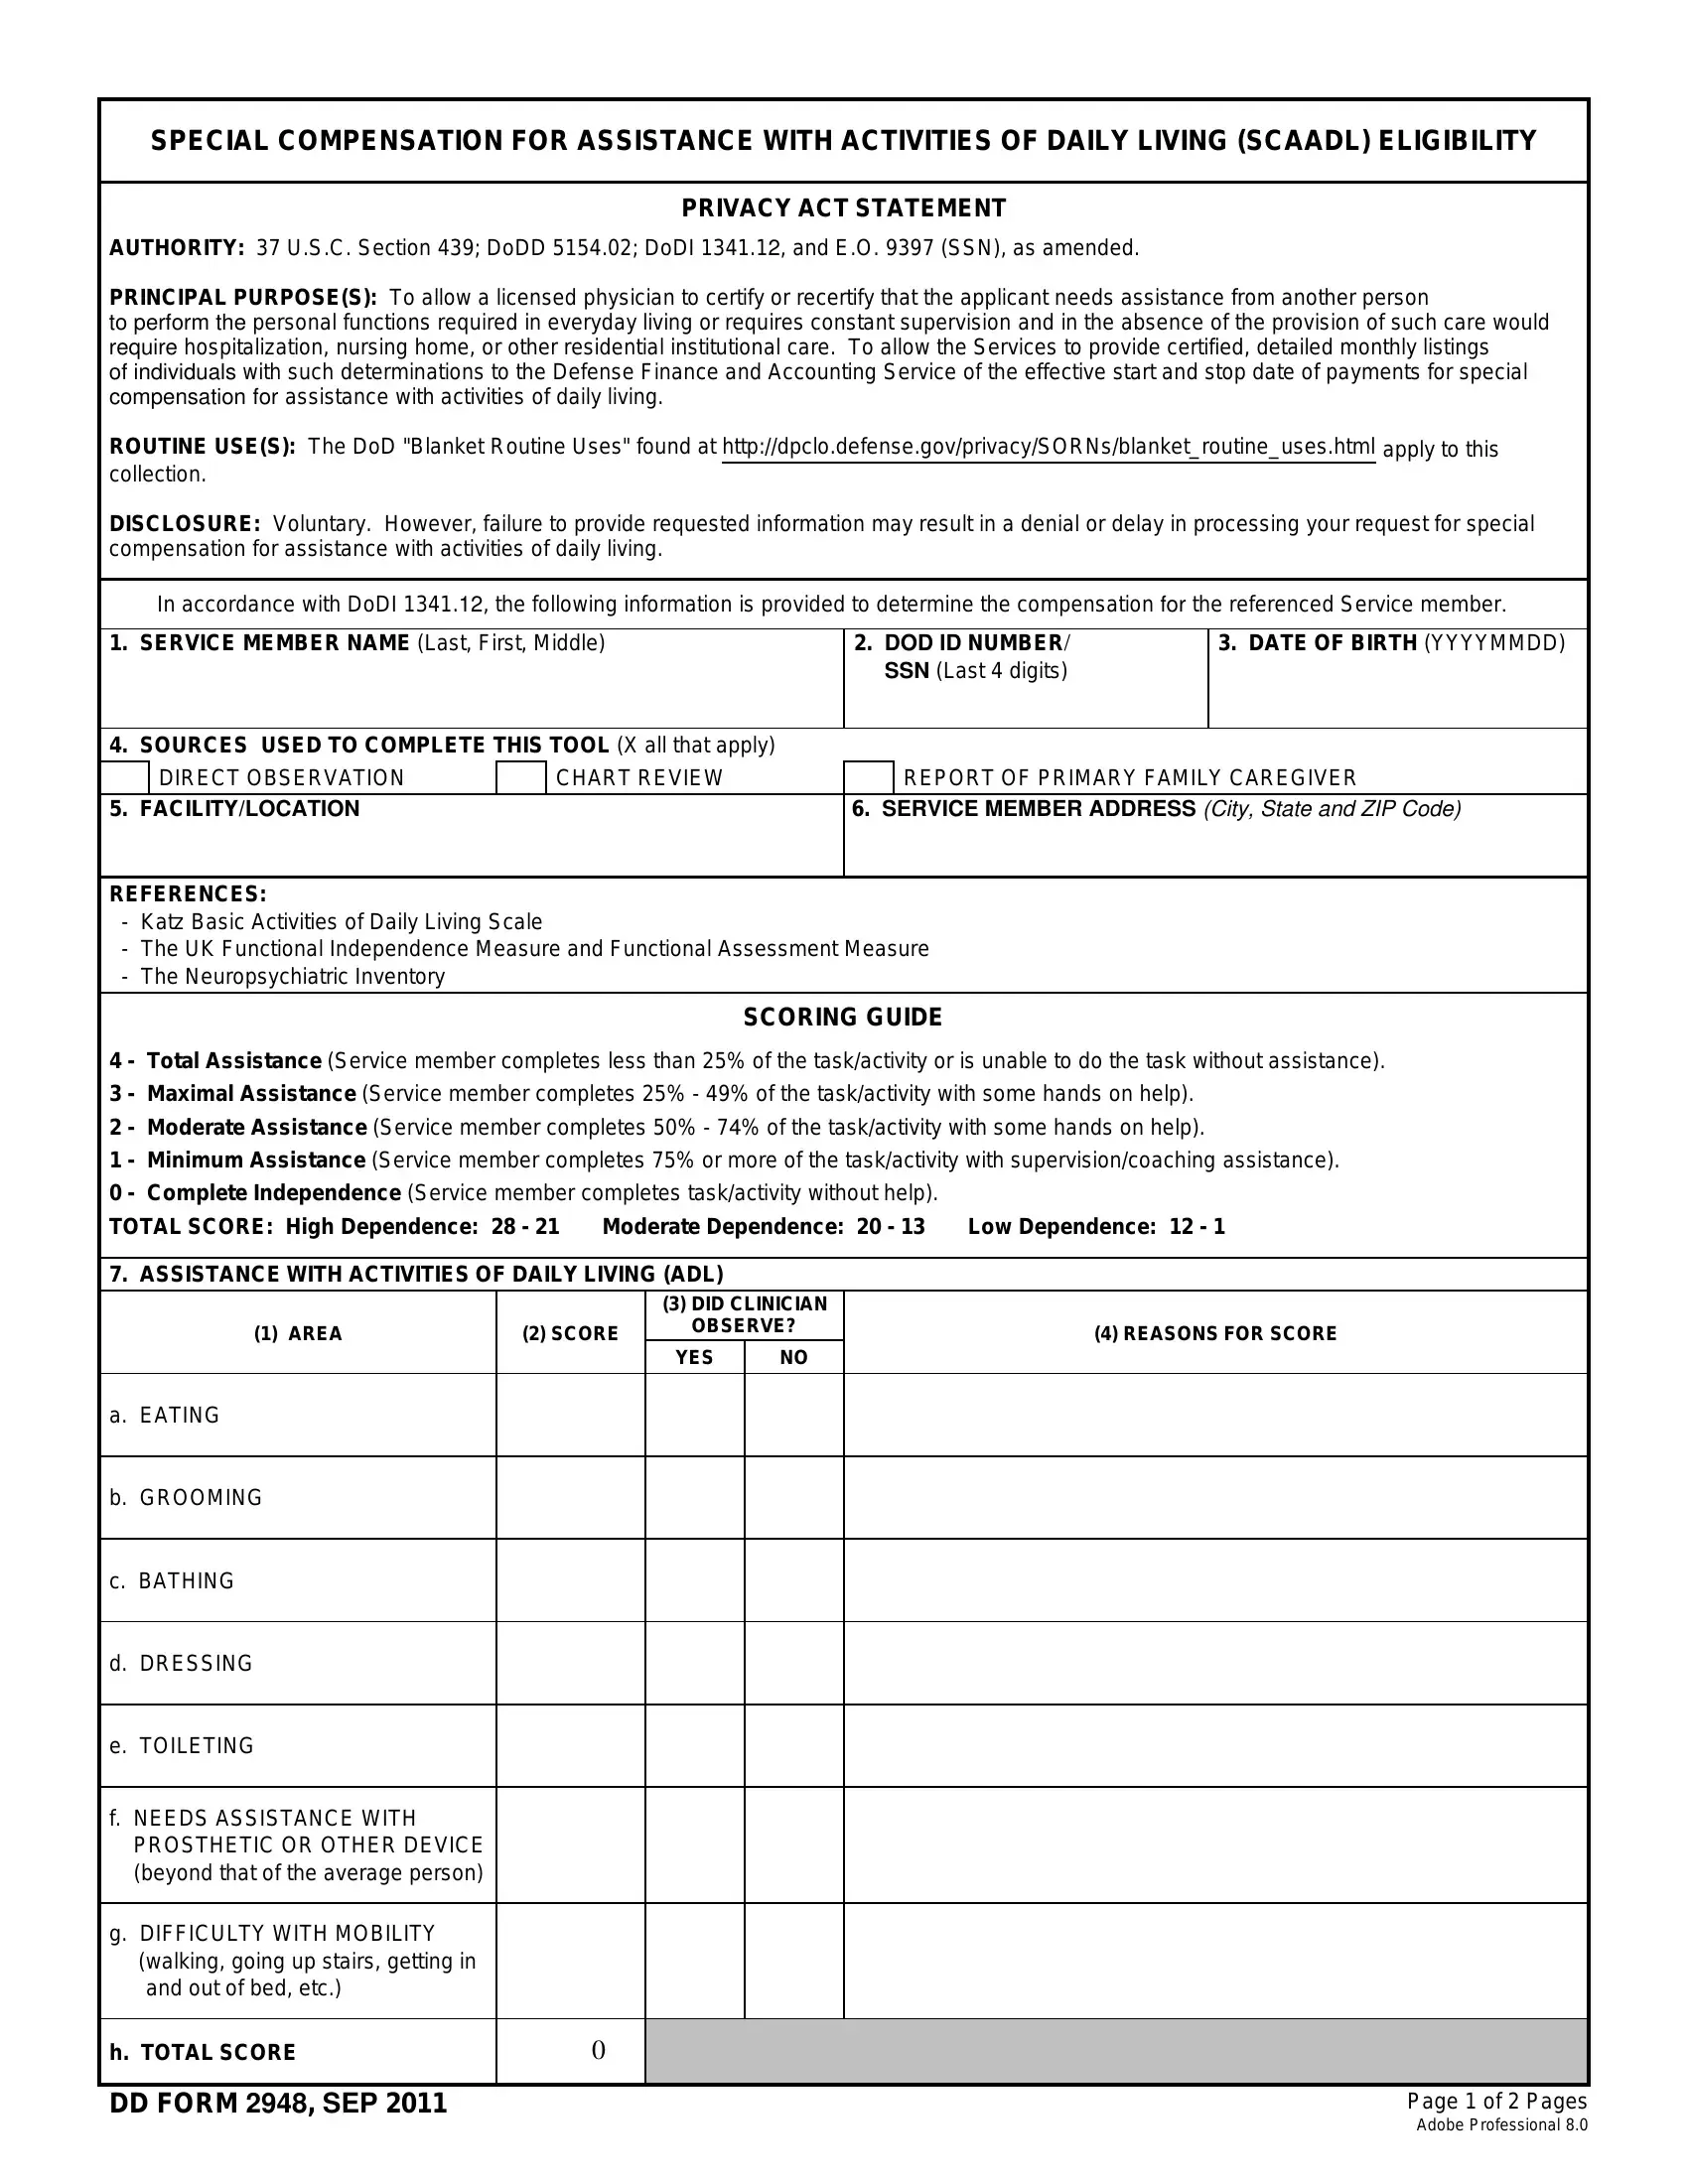 dd-form-2948-fill-out-printable-pdf-forms-online